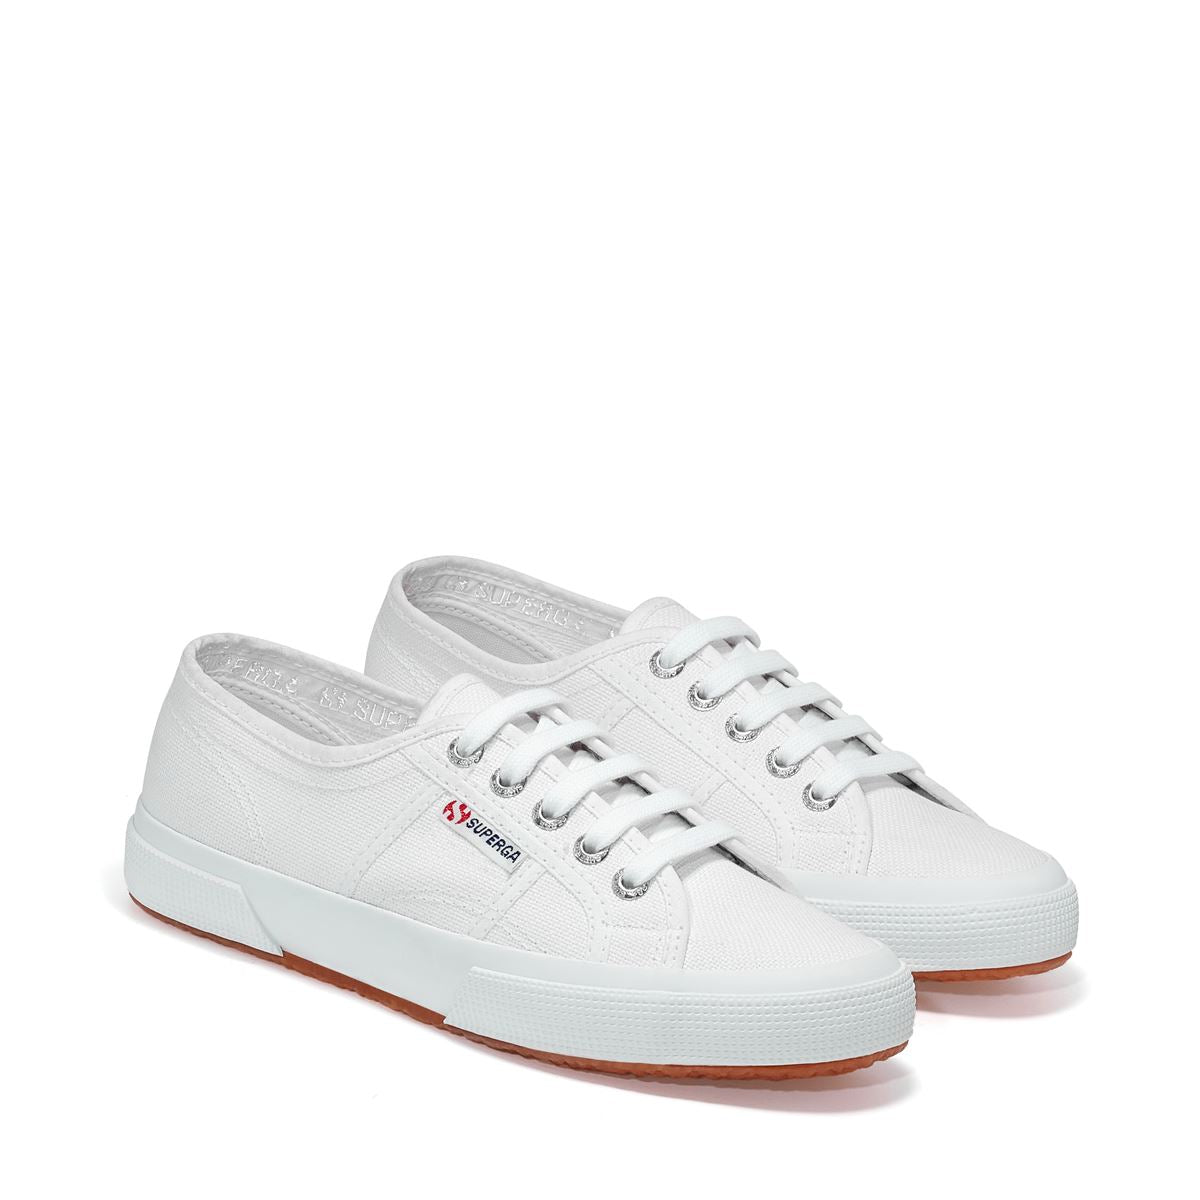 2750 Cotu Classic Sneakers White- Hover Image